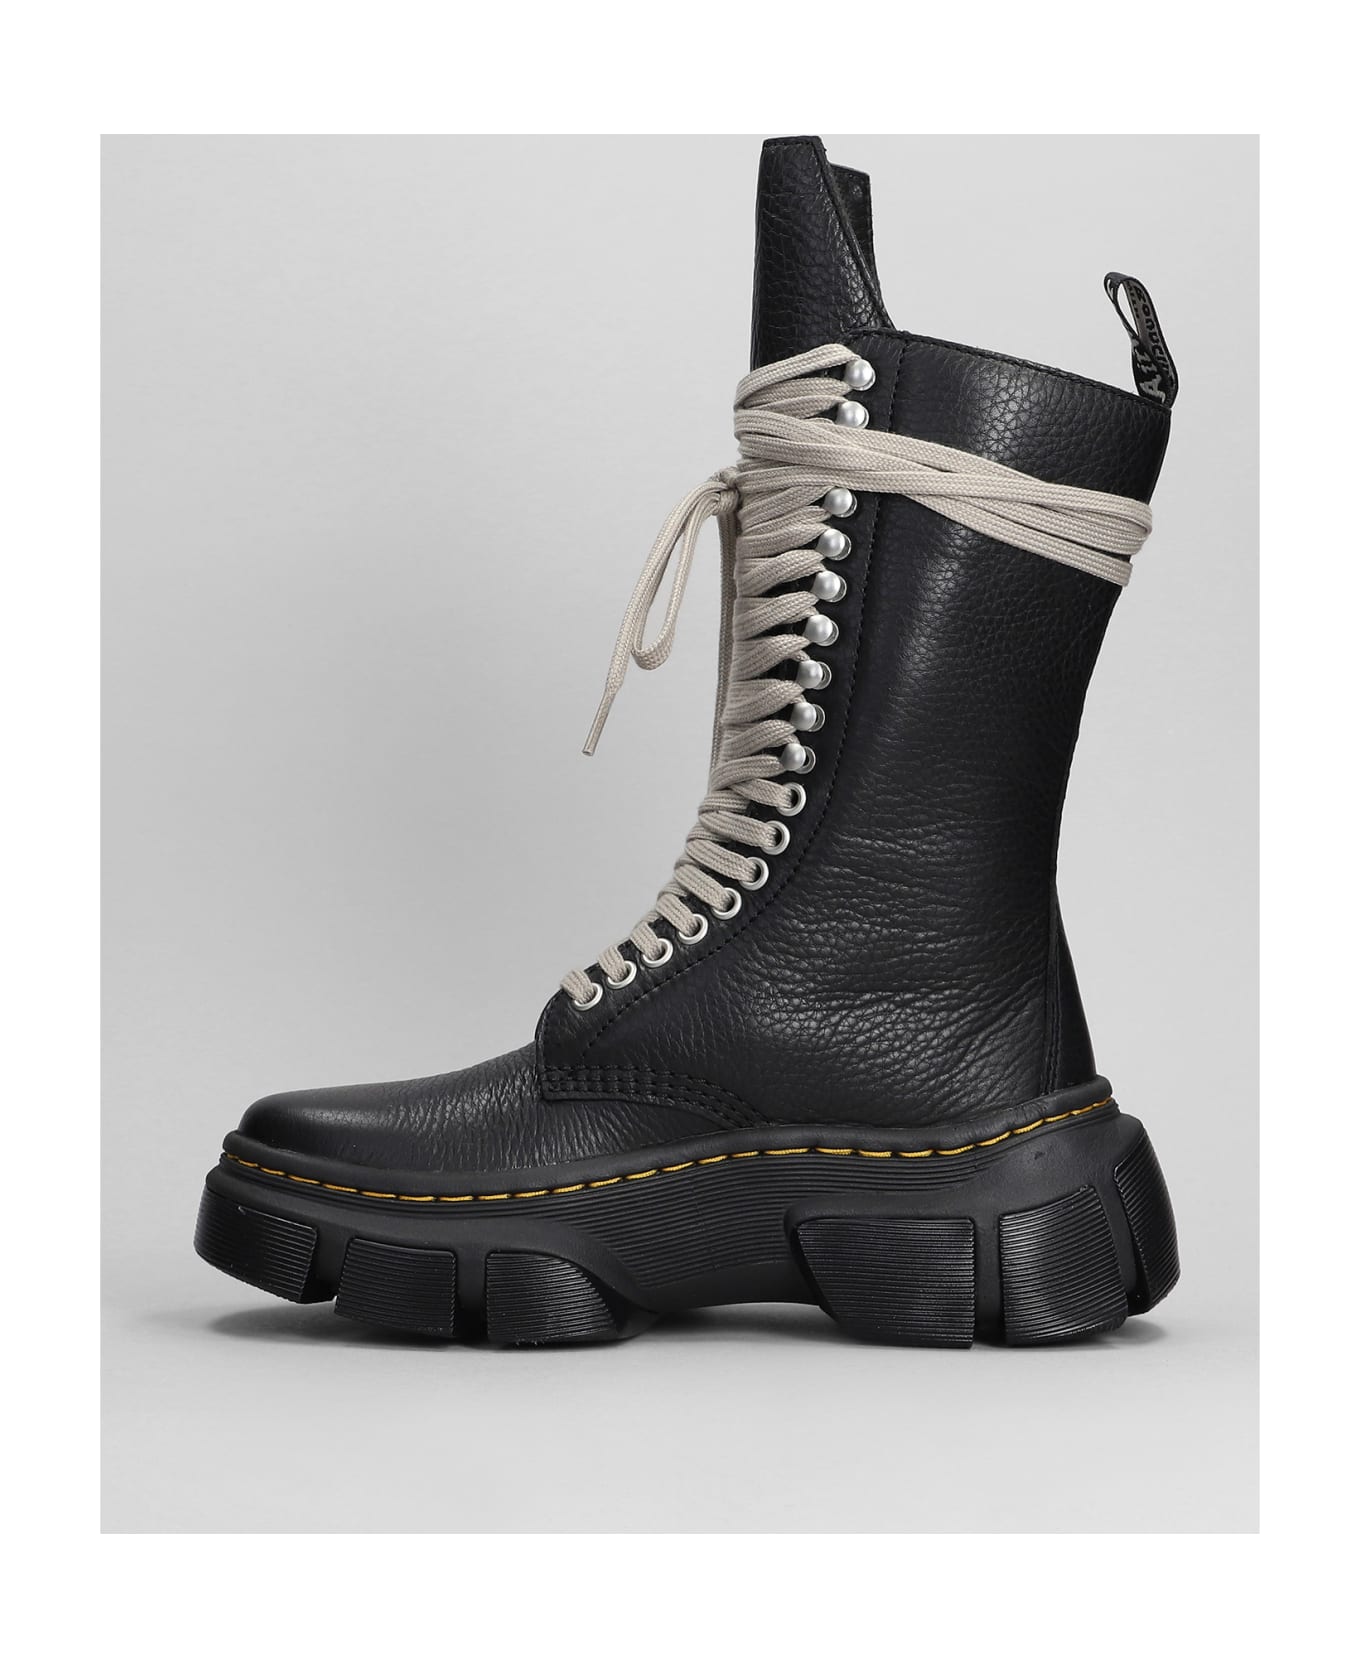 Rick Owens x Dr. Martens Dmxl Length Boot Combat Boots In Black Leather - black ブーツ